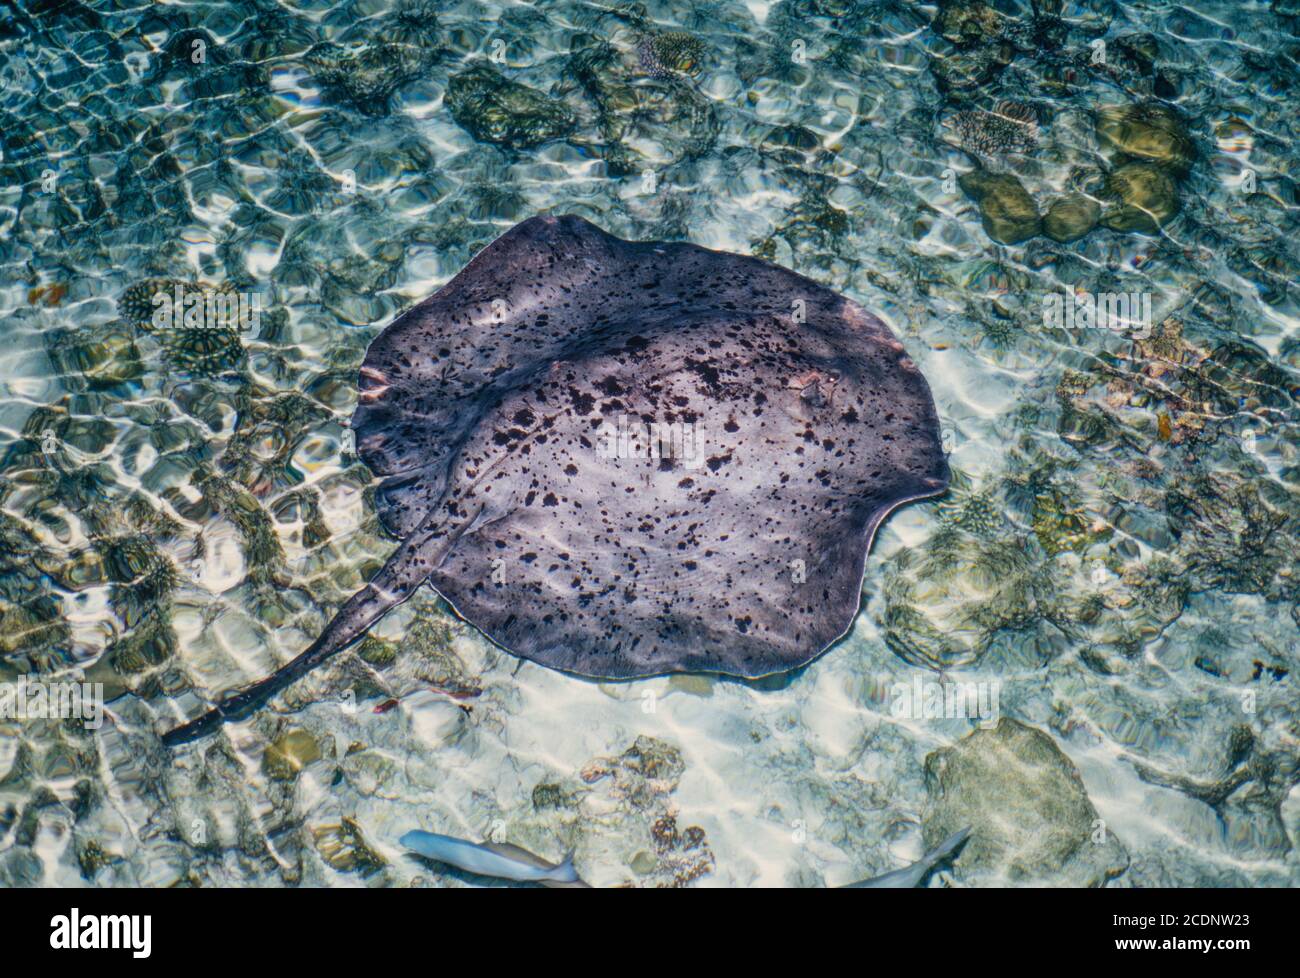 Black-spotted Stingray, Taeniura meyeni, feeding at night, Ari Atoll, Maldives. Archive image 2002. High resolution scan from transparency, August 2020. Credit: Malcolm Park/Alamy. Stock Photo